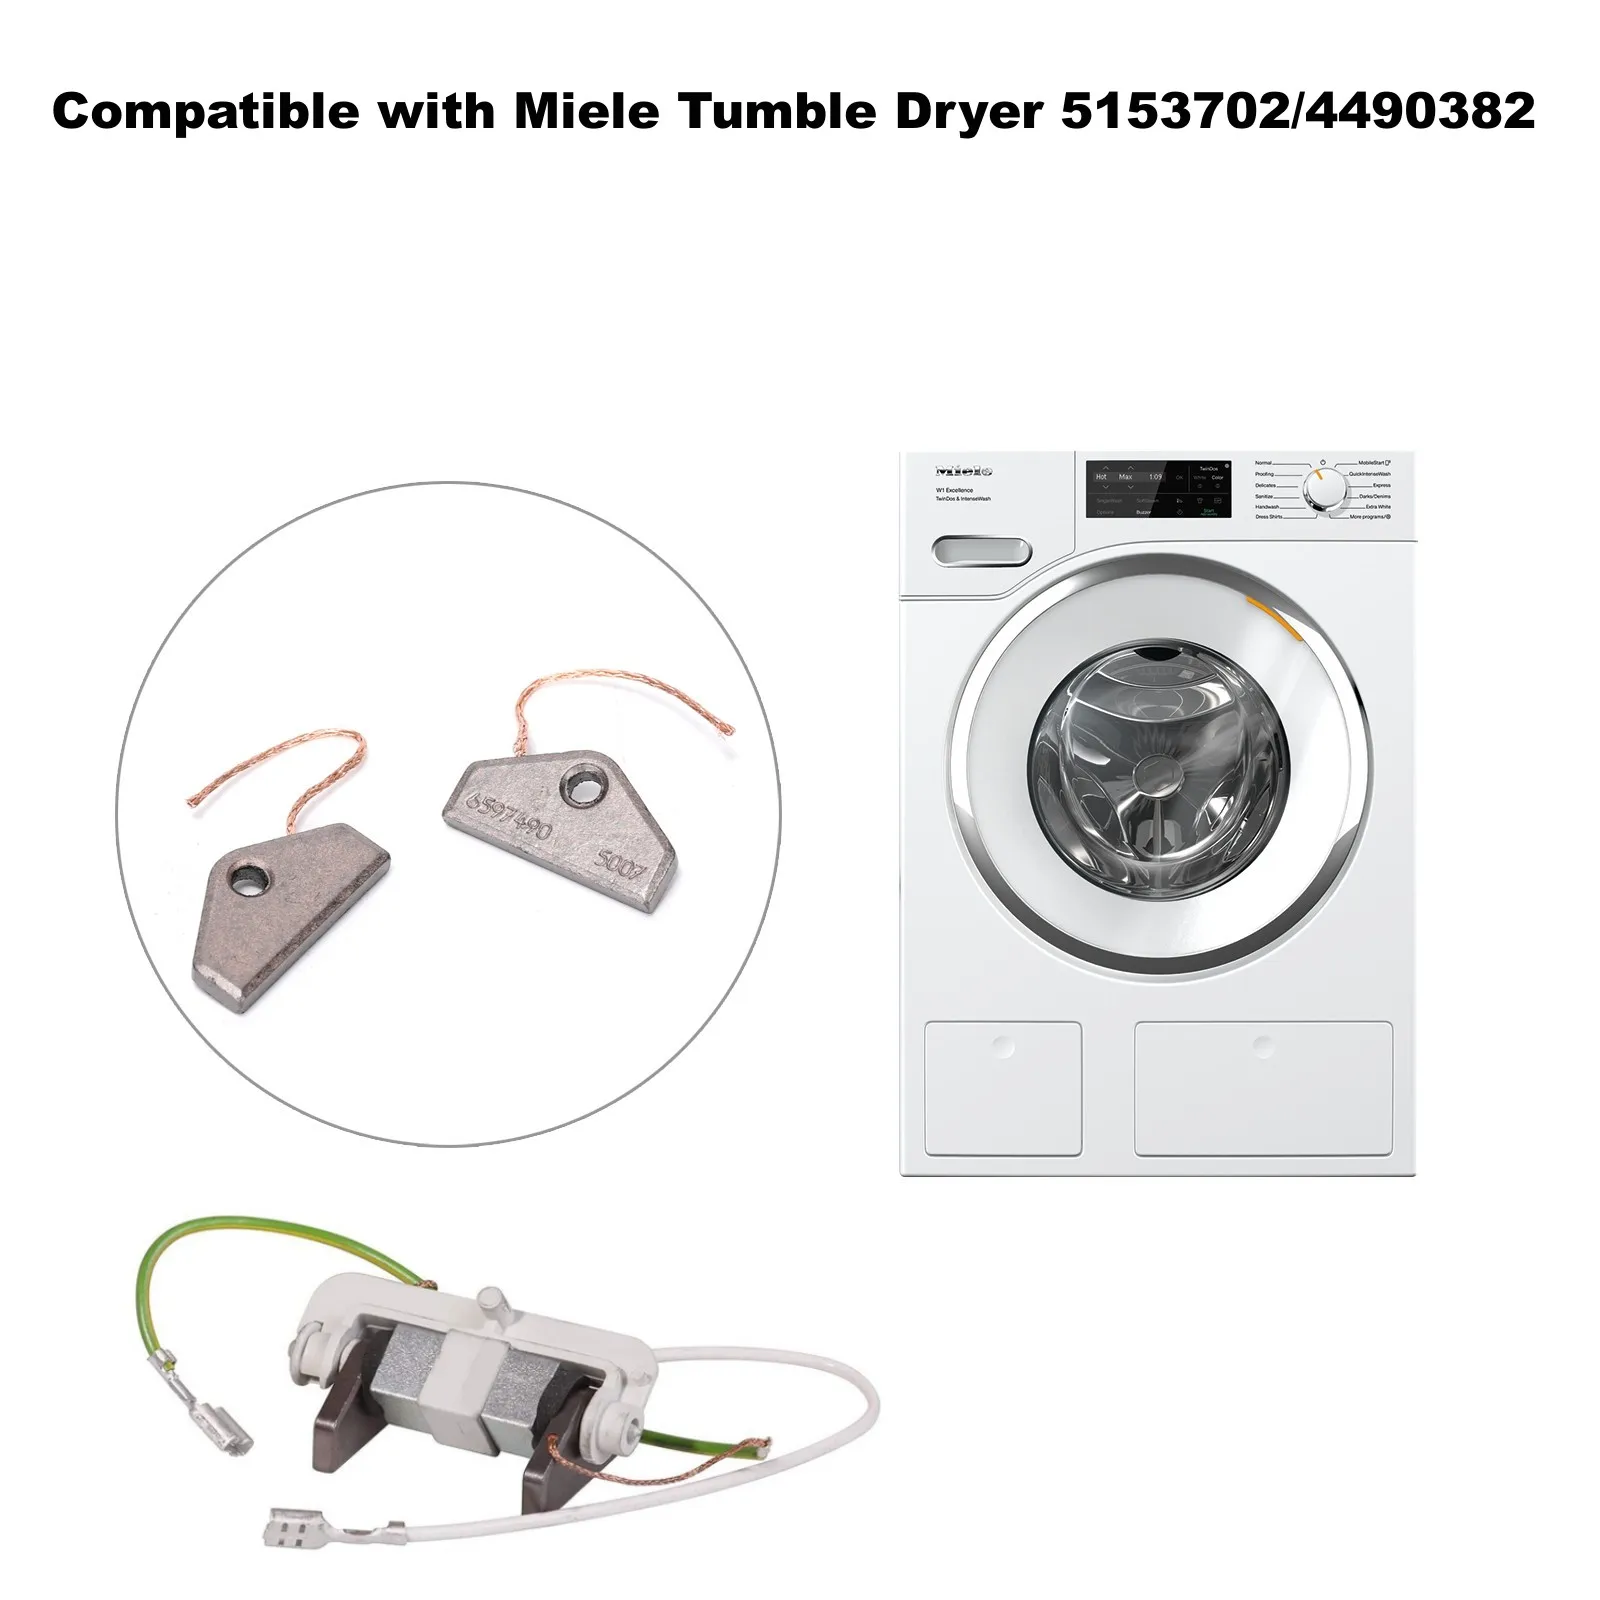 4Pcs Dryer Motor Carbon Brush Copper-containing 6597490 5007 (30x16x4mm) Compatible with Miele Tumble Dryer 5153702/4490382